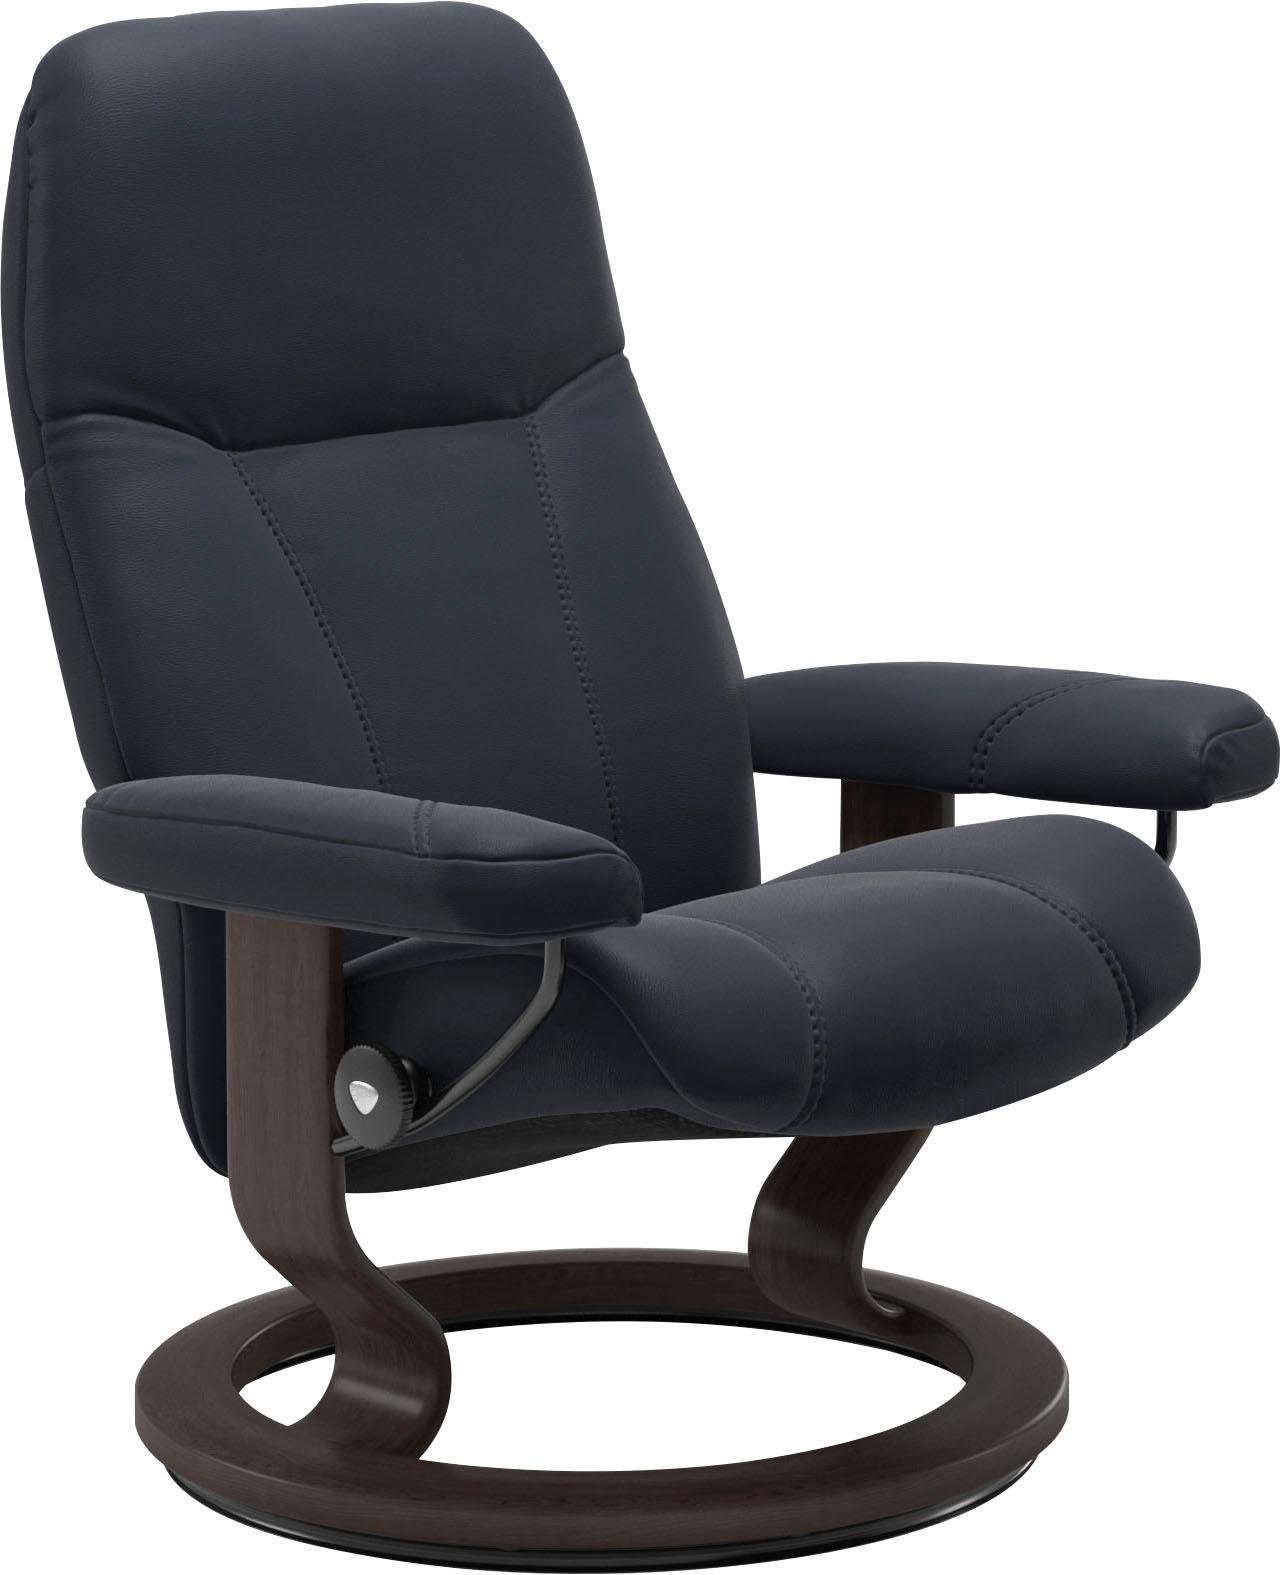 Stressless® Relaxsessel Consul, mit Classic Größe Base, Wenge M, Gestell